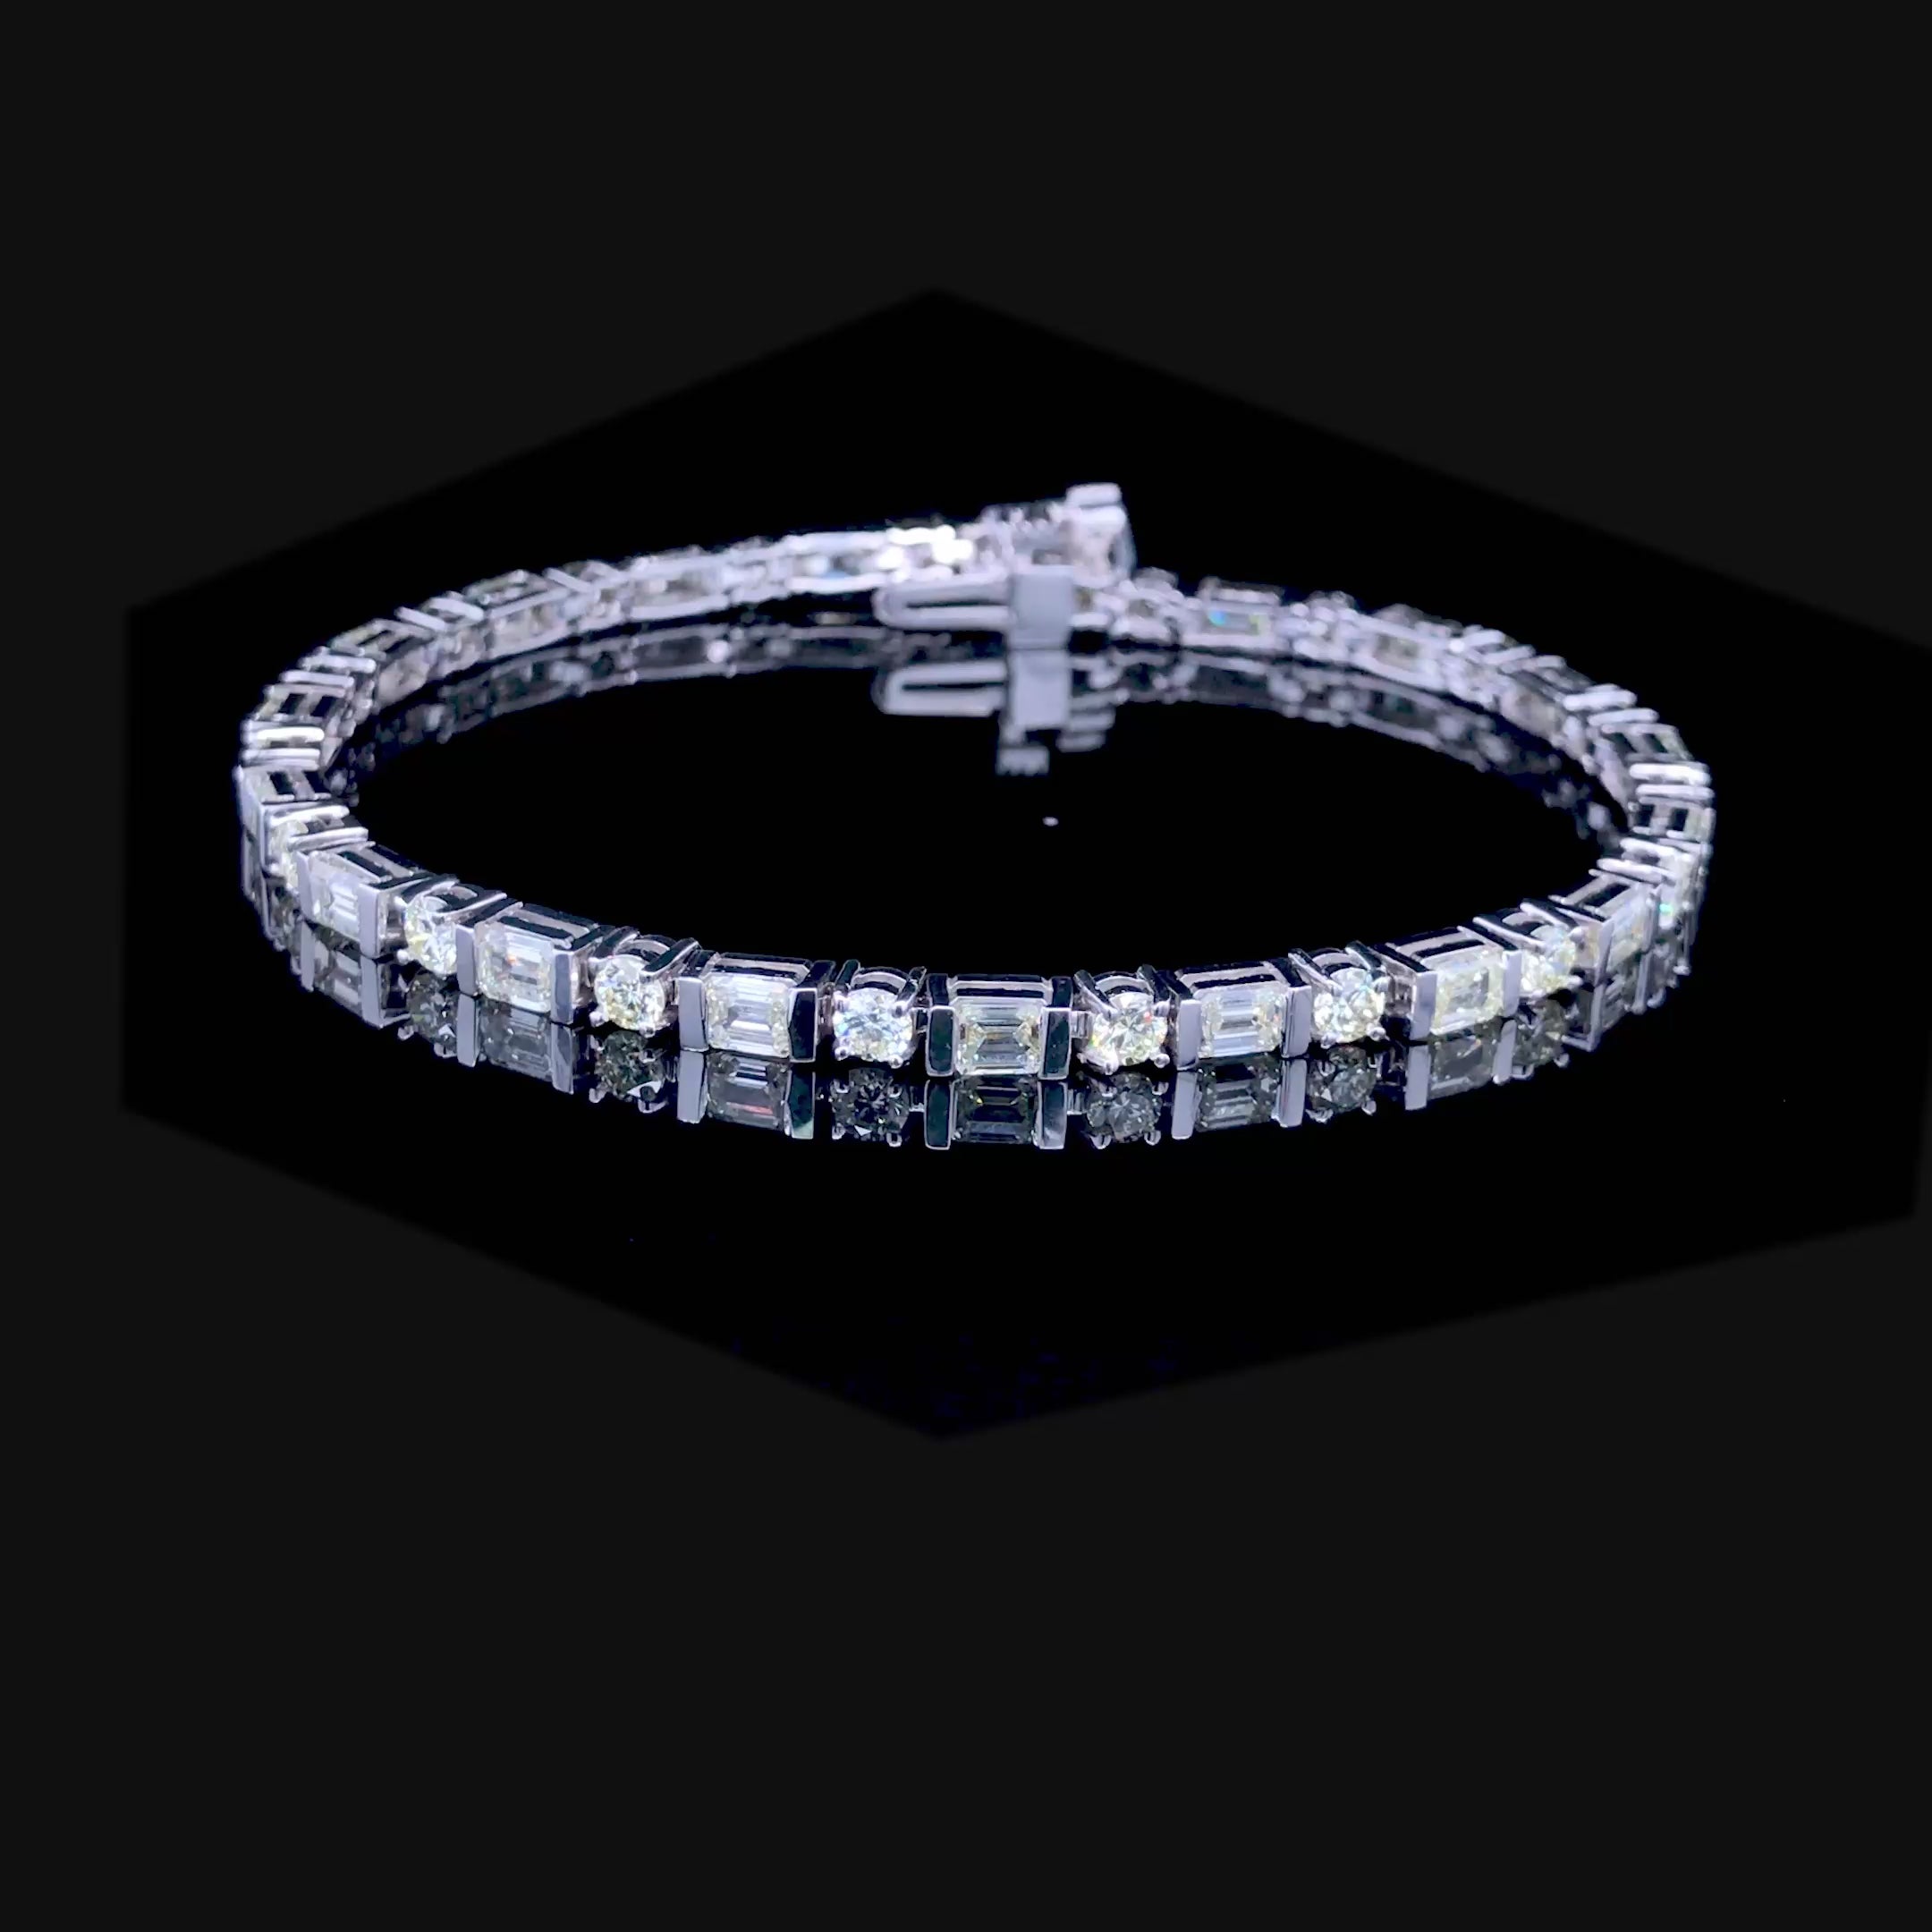 Mesmerizing 6.30CT Emerald and Round Cut Diamond Tennis Bracelet in 18KT White Gold